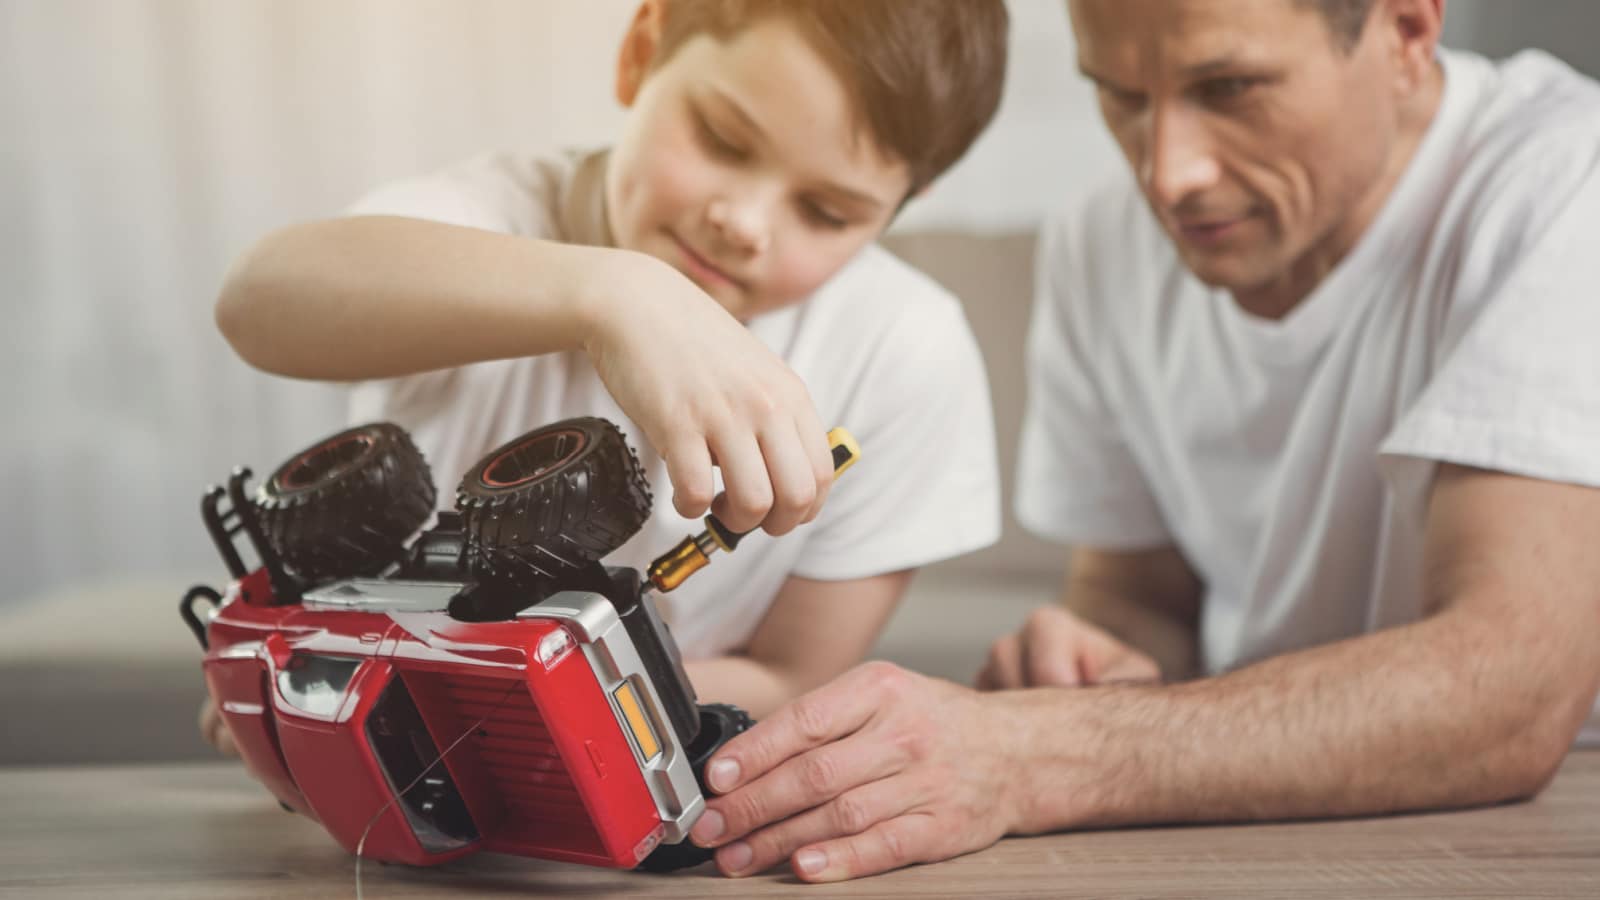 Interested boy is repairing toy by instrument with help of his dad. Focus on small red car